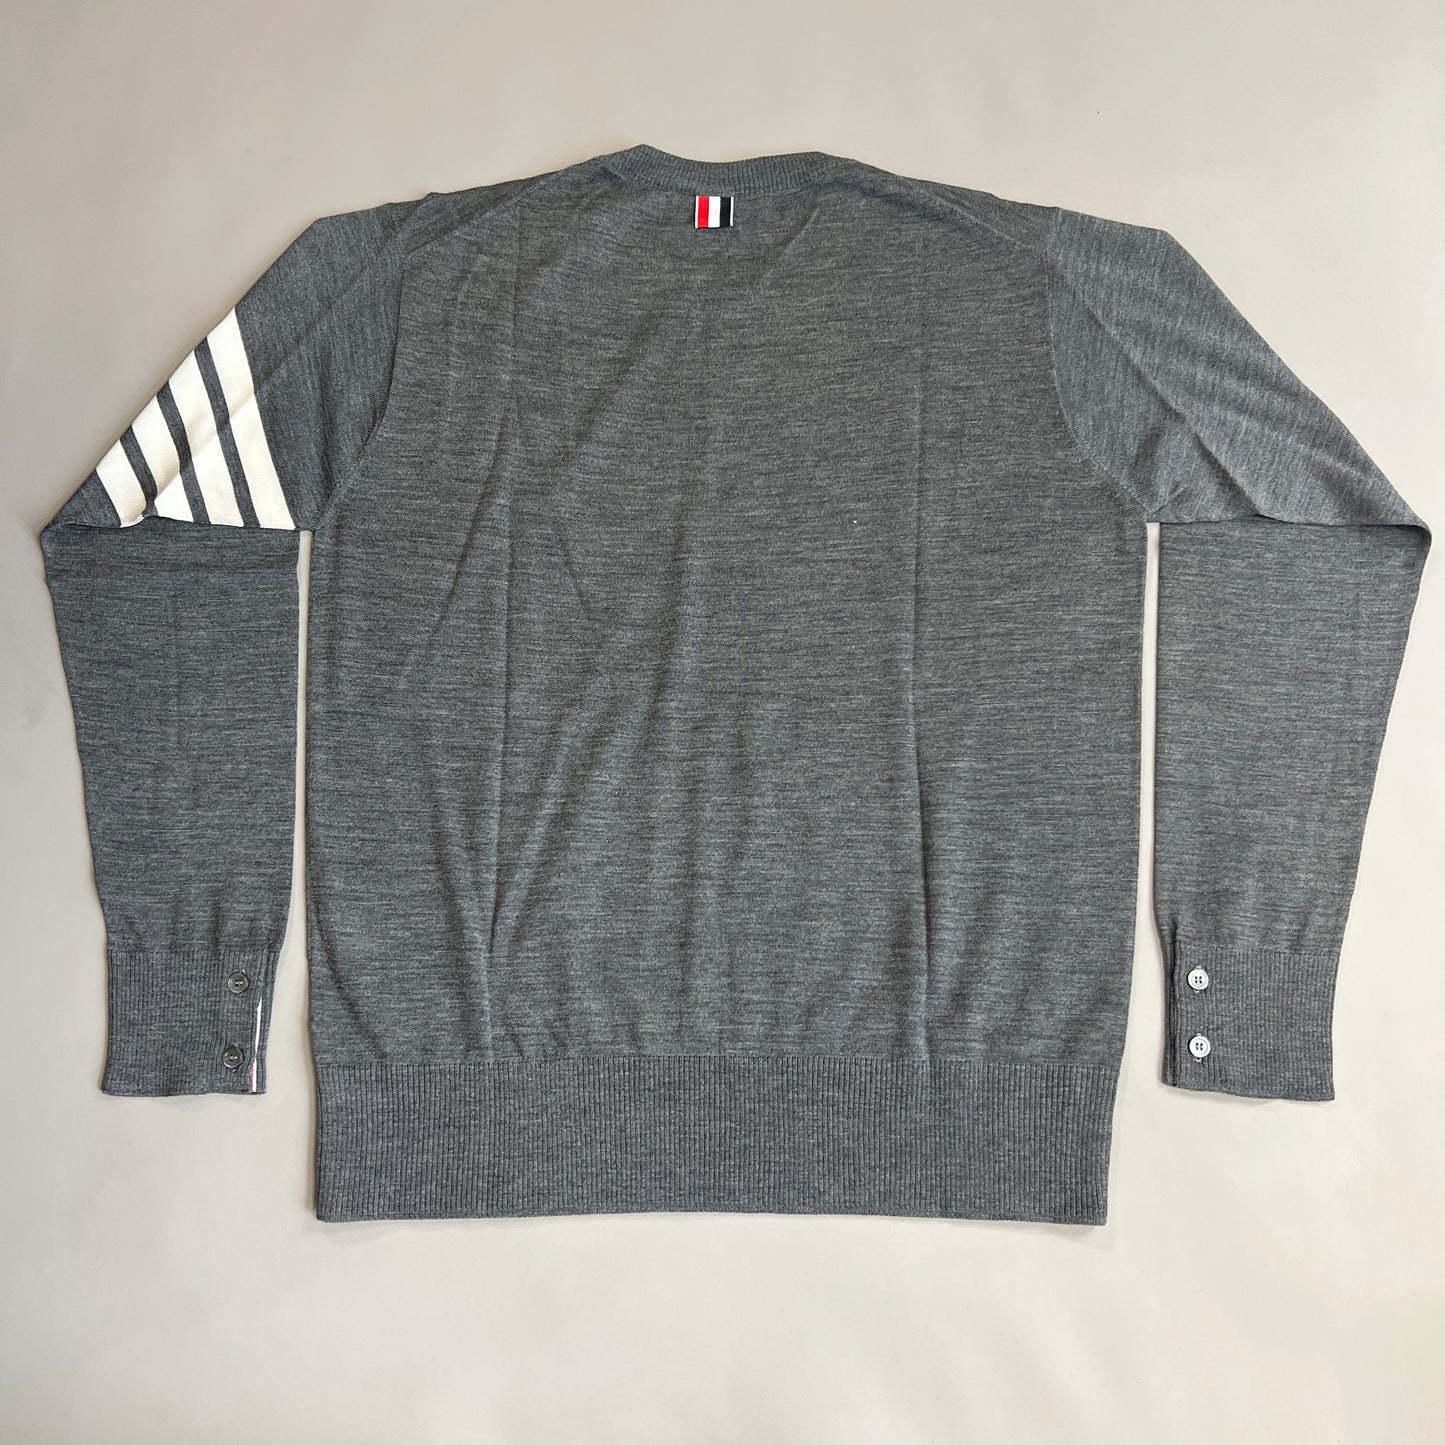 THOM BROWNE New York Classic Crewneck Pullover w/4 Bar Sleeve in Sustainable Fine Merino Wool Med Grey Size 2 (New)